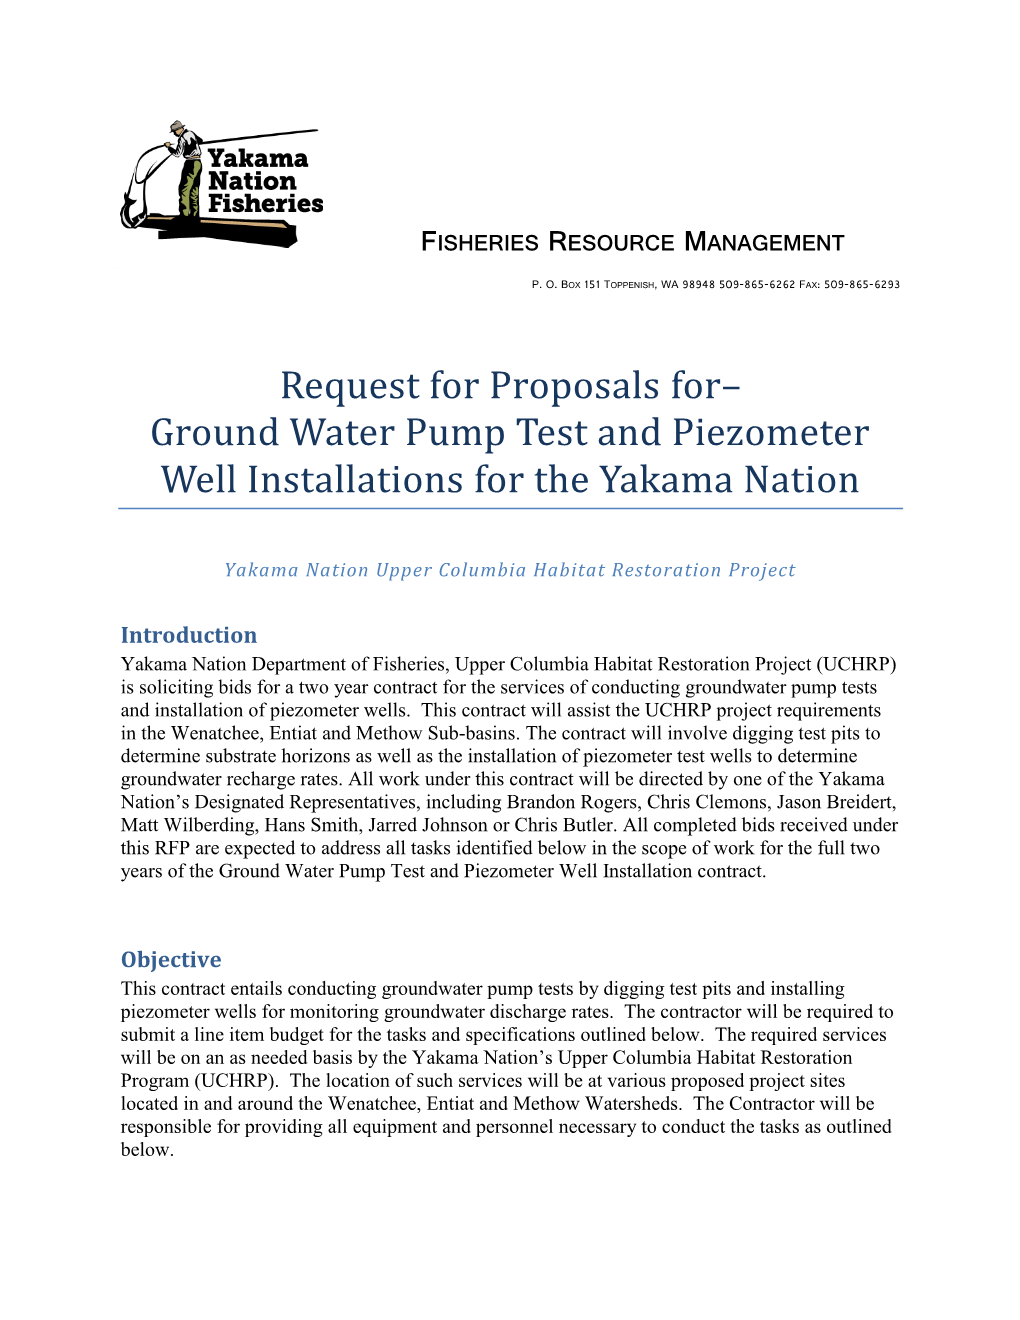 Request for Proposals For– Ground Water Pump Test and Piezometer Well Installations for the Yakama Nation